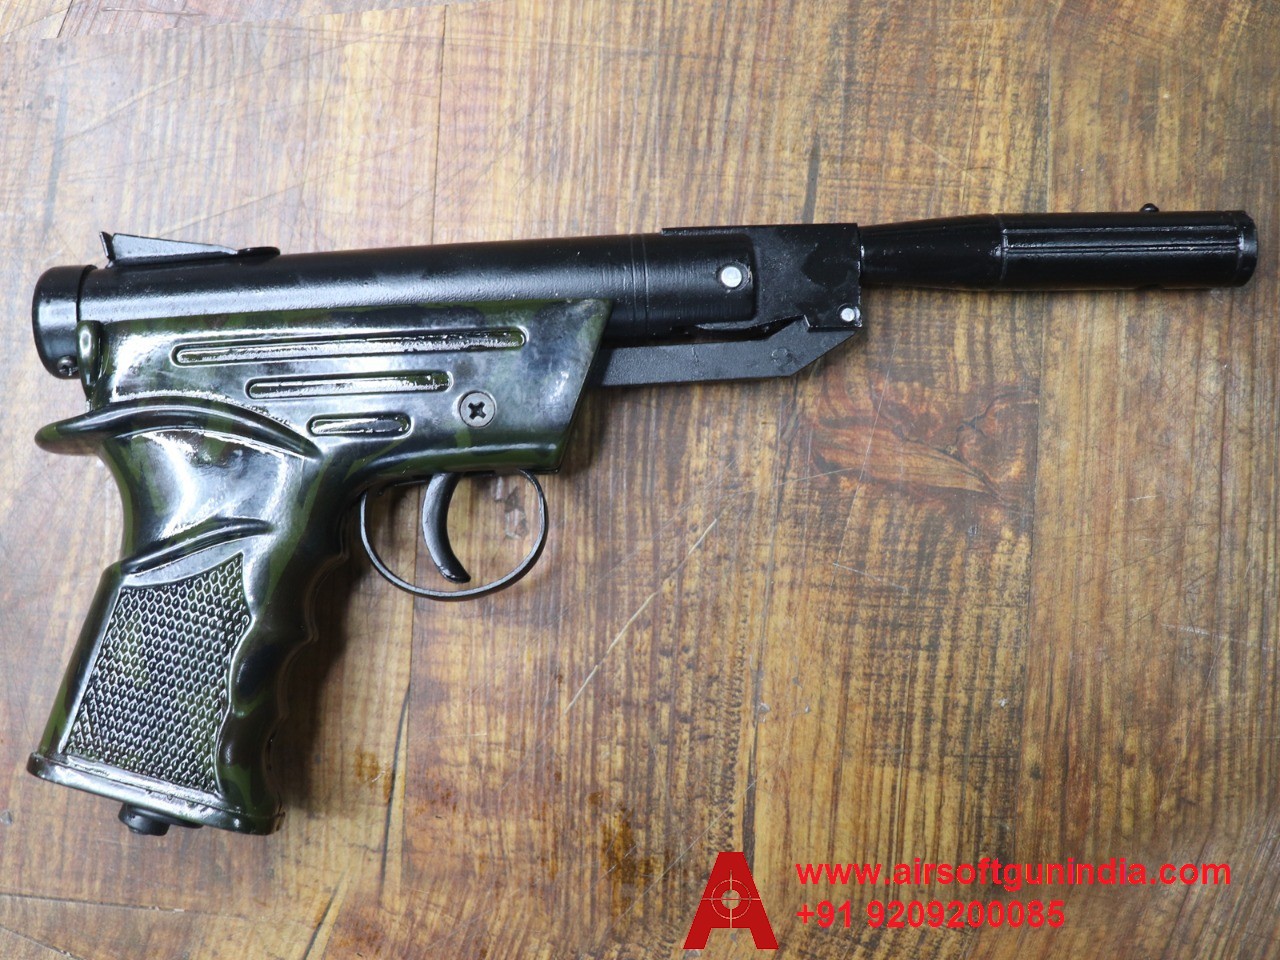 GLOBUS Blackberry Army .177 Indian Air Pistol By Airsoft Gun India